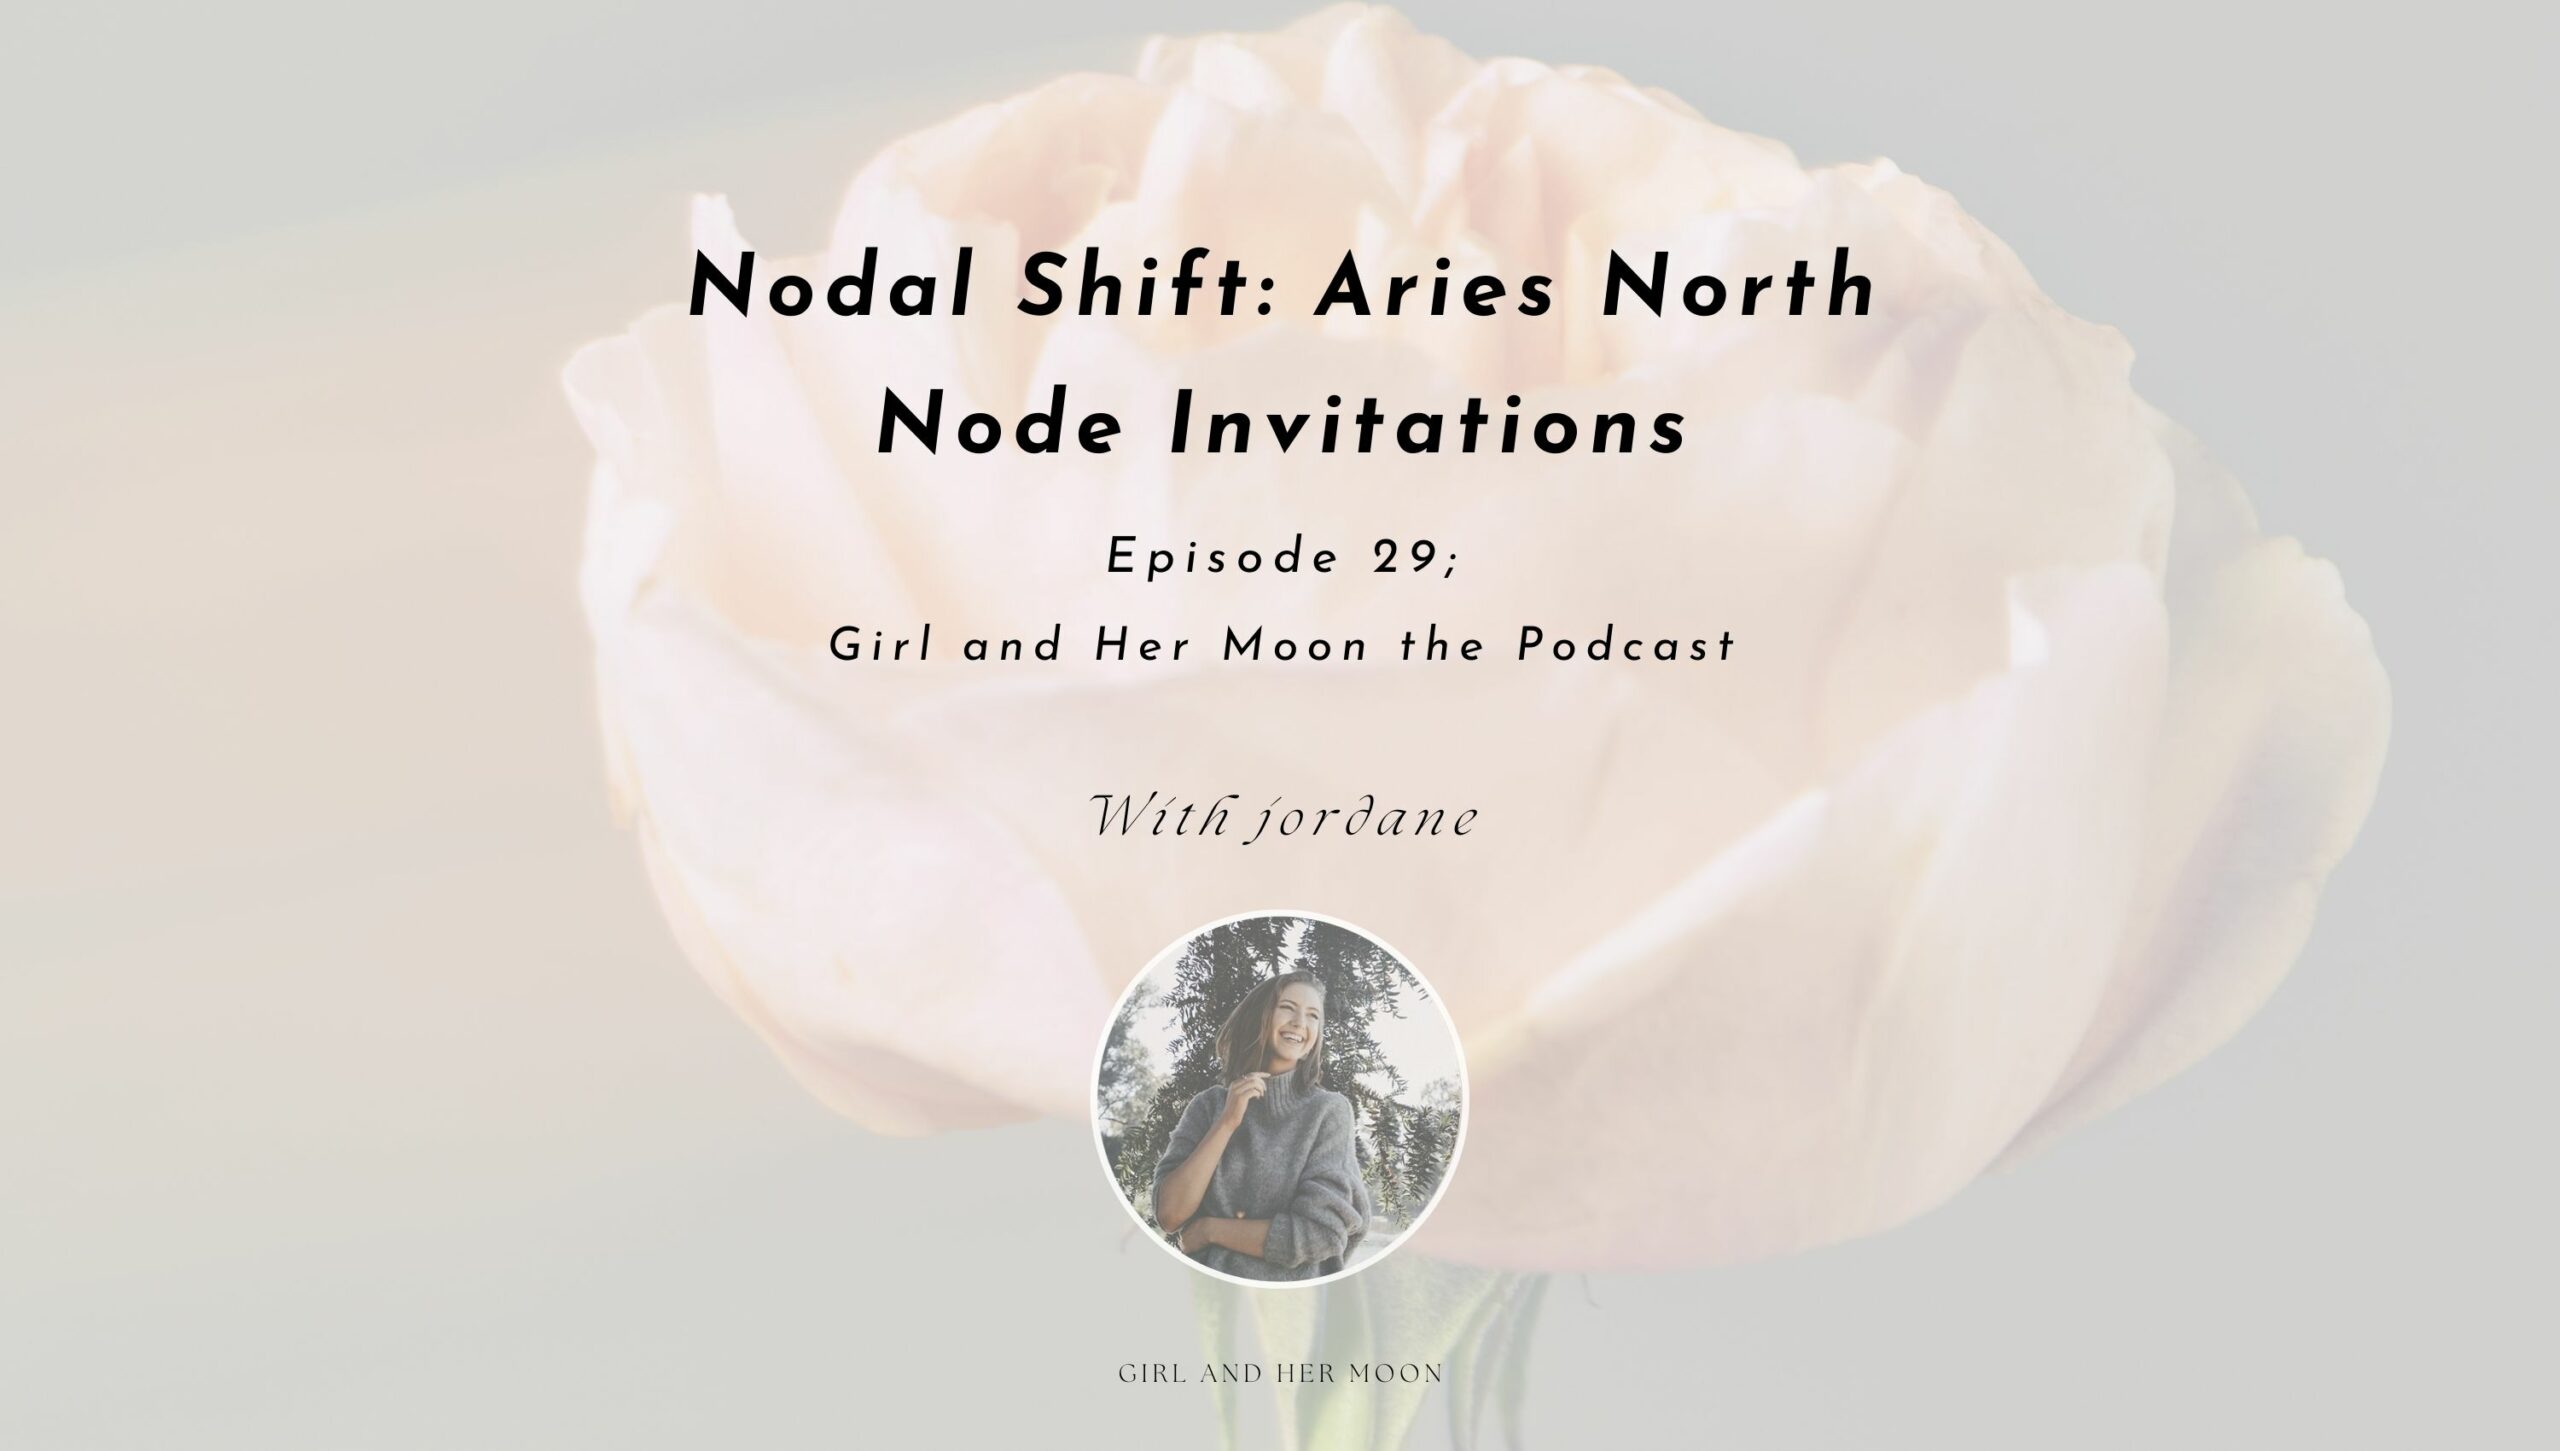 Nodal Shift Aries North Node Invitations Girl and Her Moon the Podcast